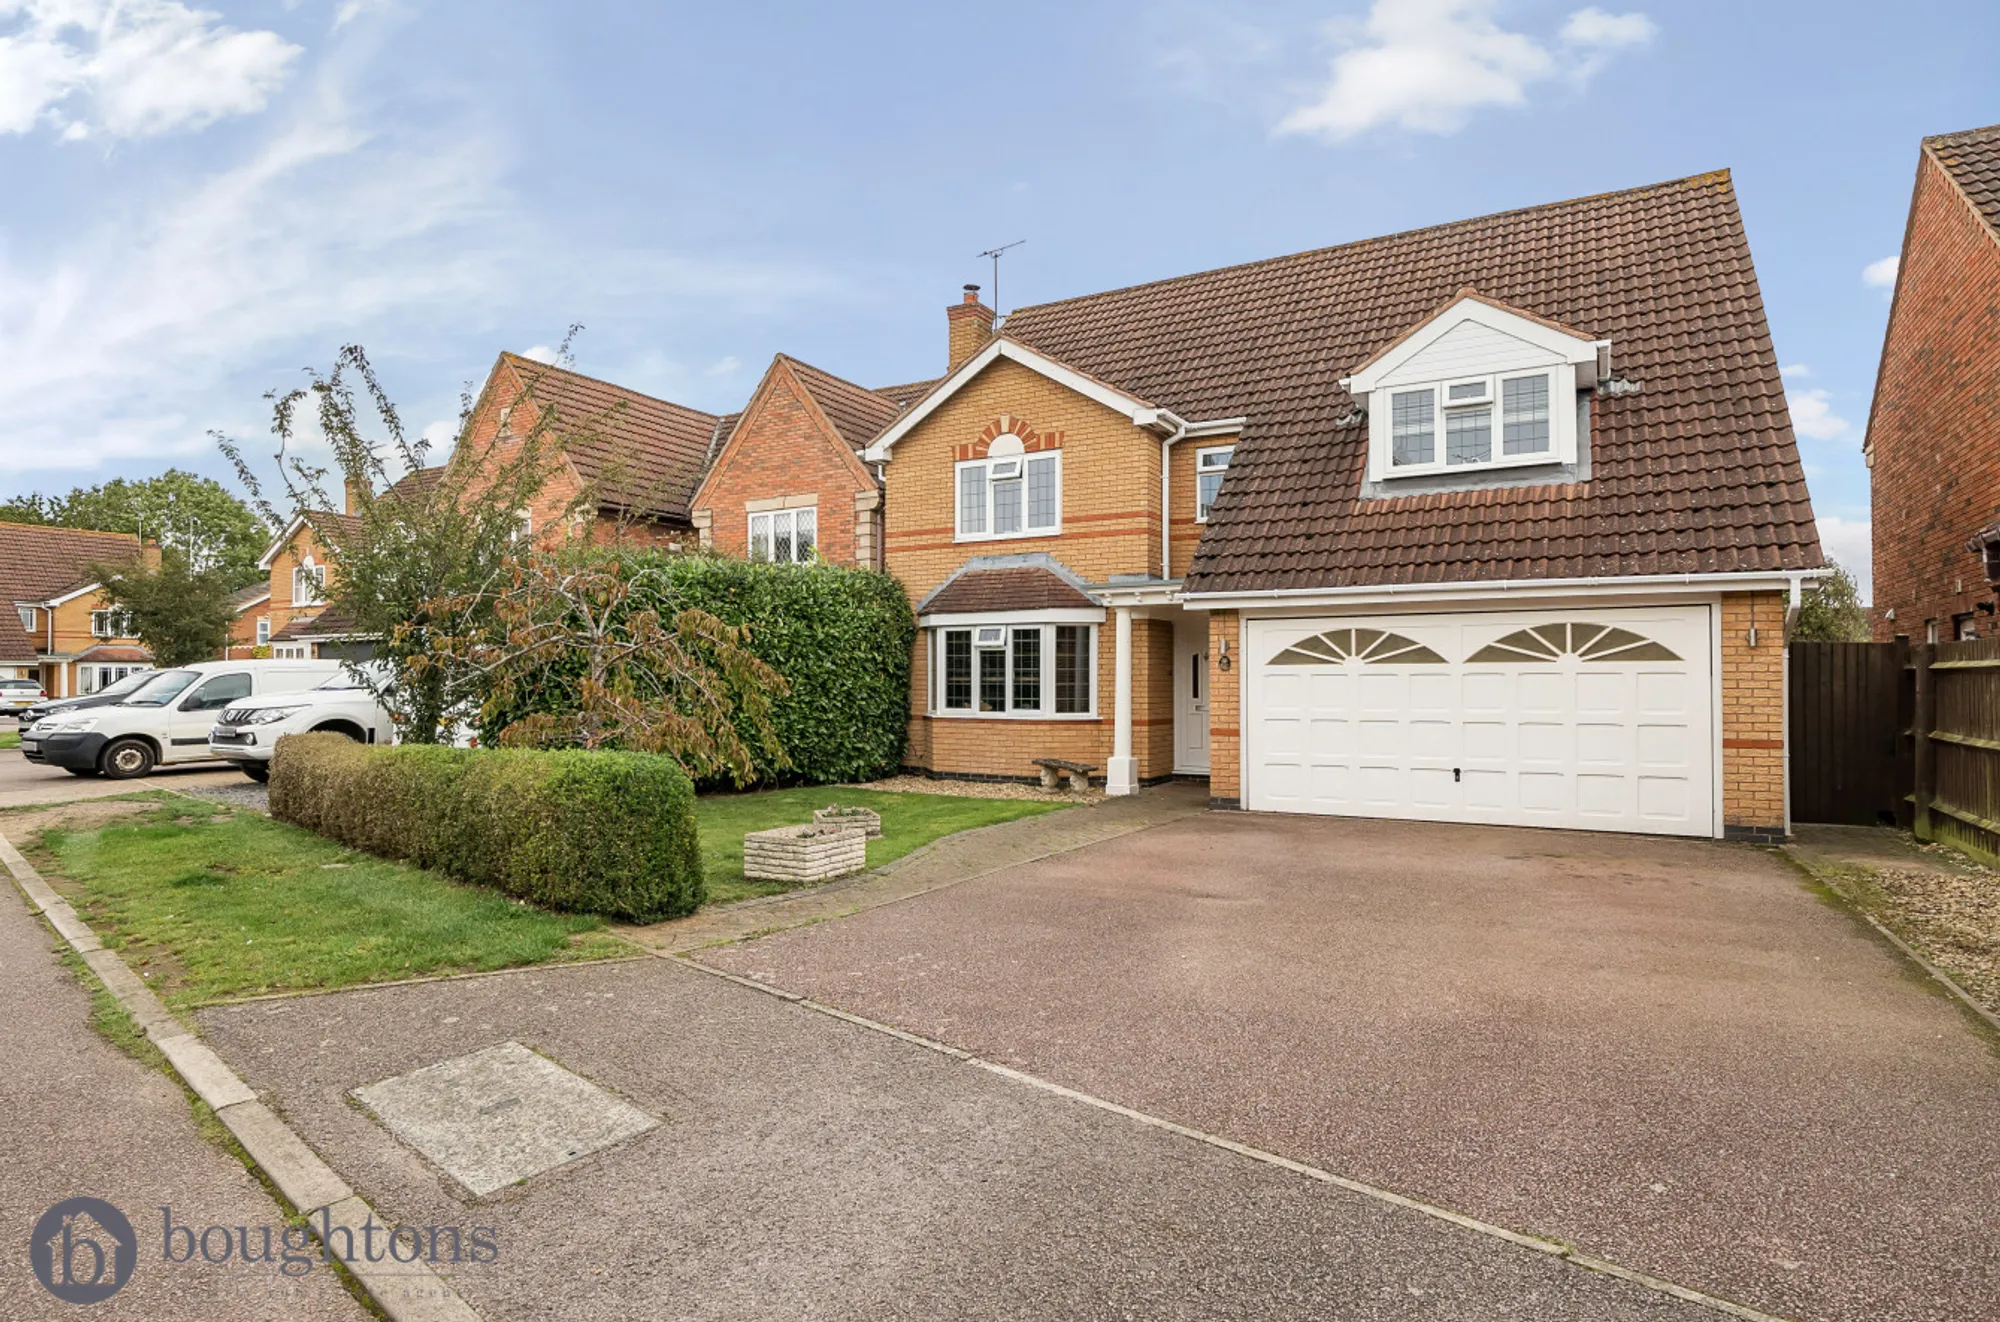 6 bed detached house for sale in John Clare Close, Brackley  - Property Image 1